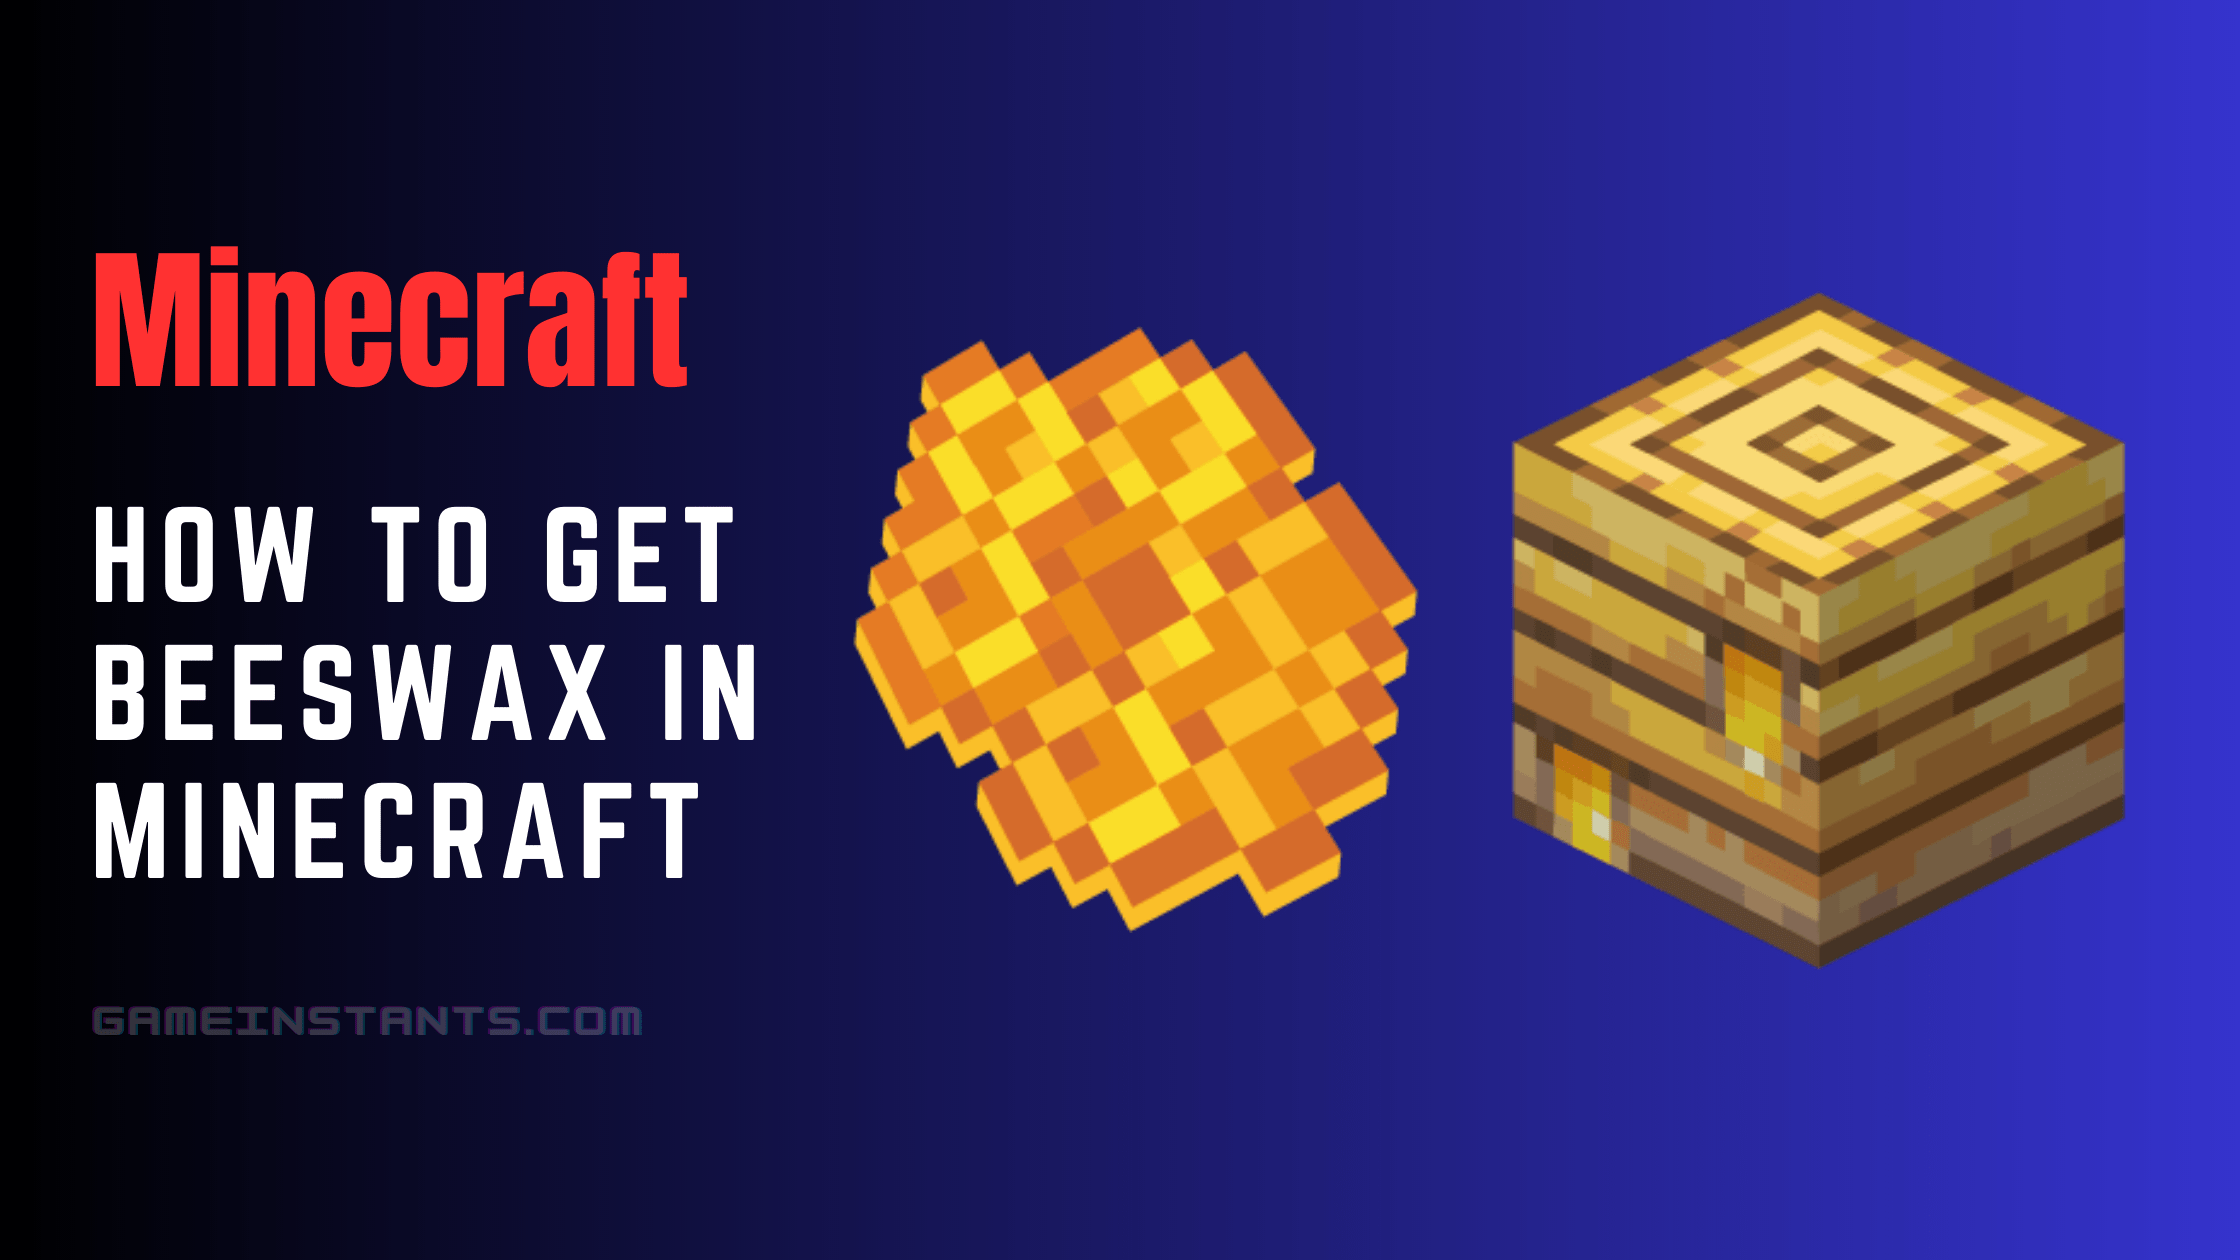 How To Get Beeswax in Minecraft